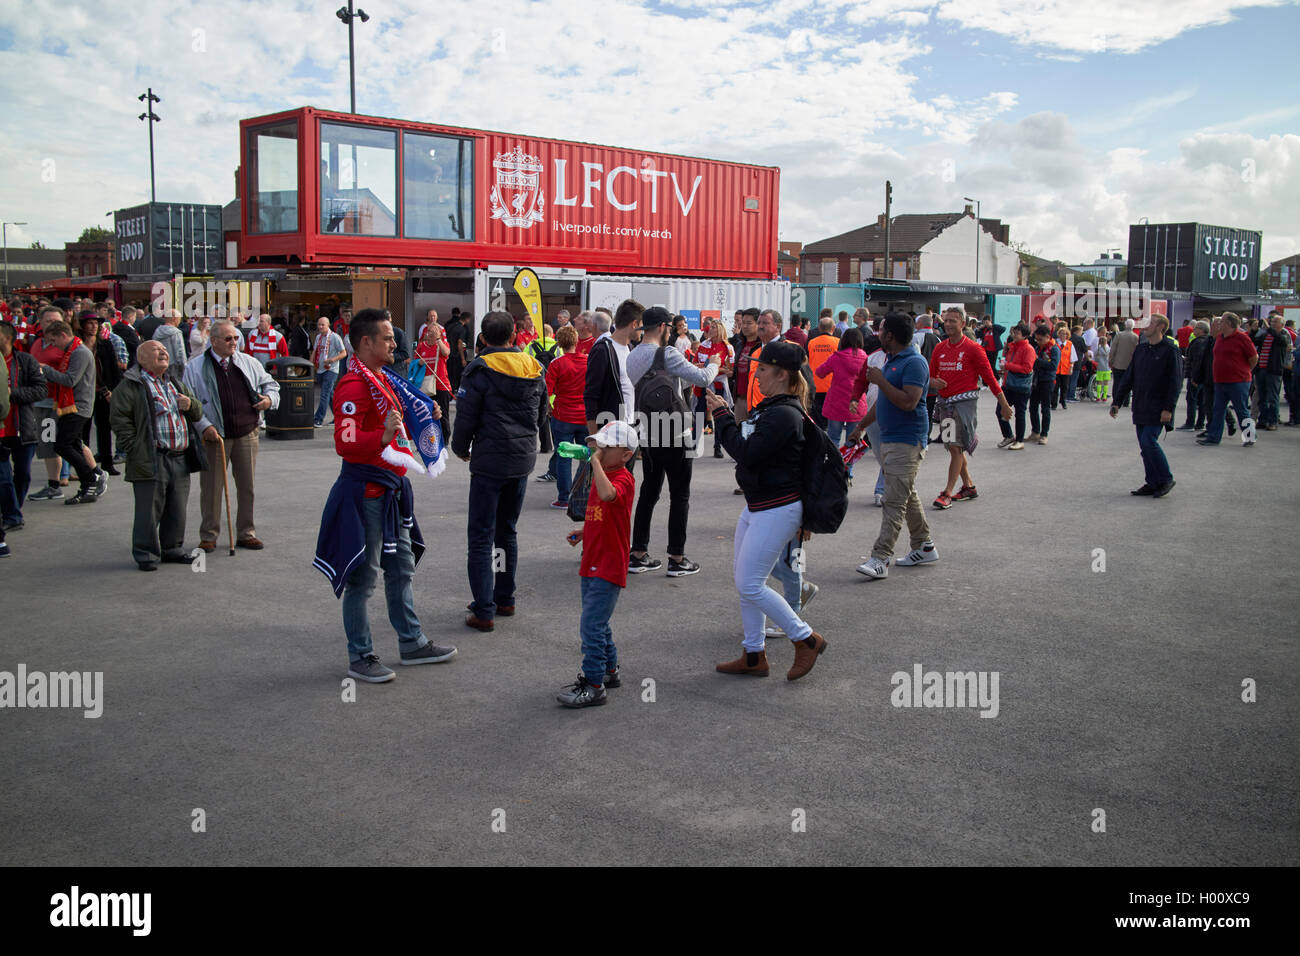 fans in the new fan zone at Liverpool FC anfield stadium Liverpool Merseyside UK Stock Photo